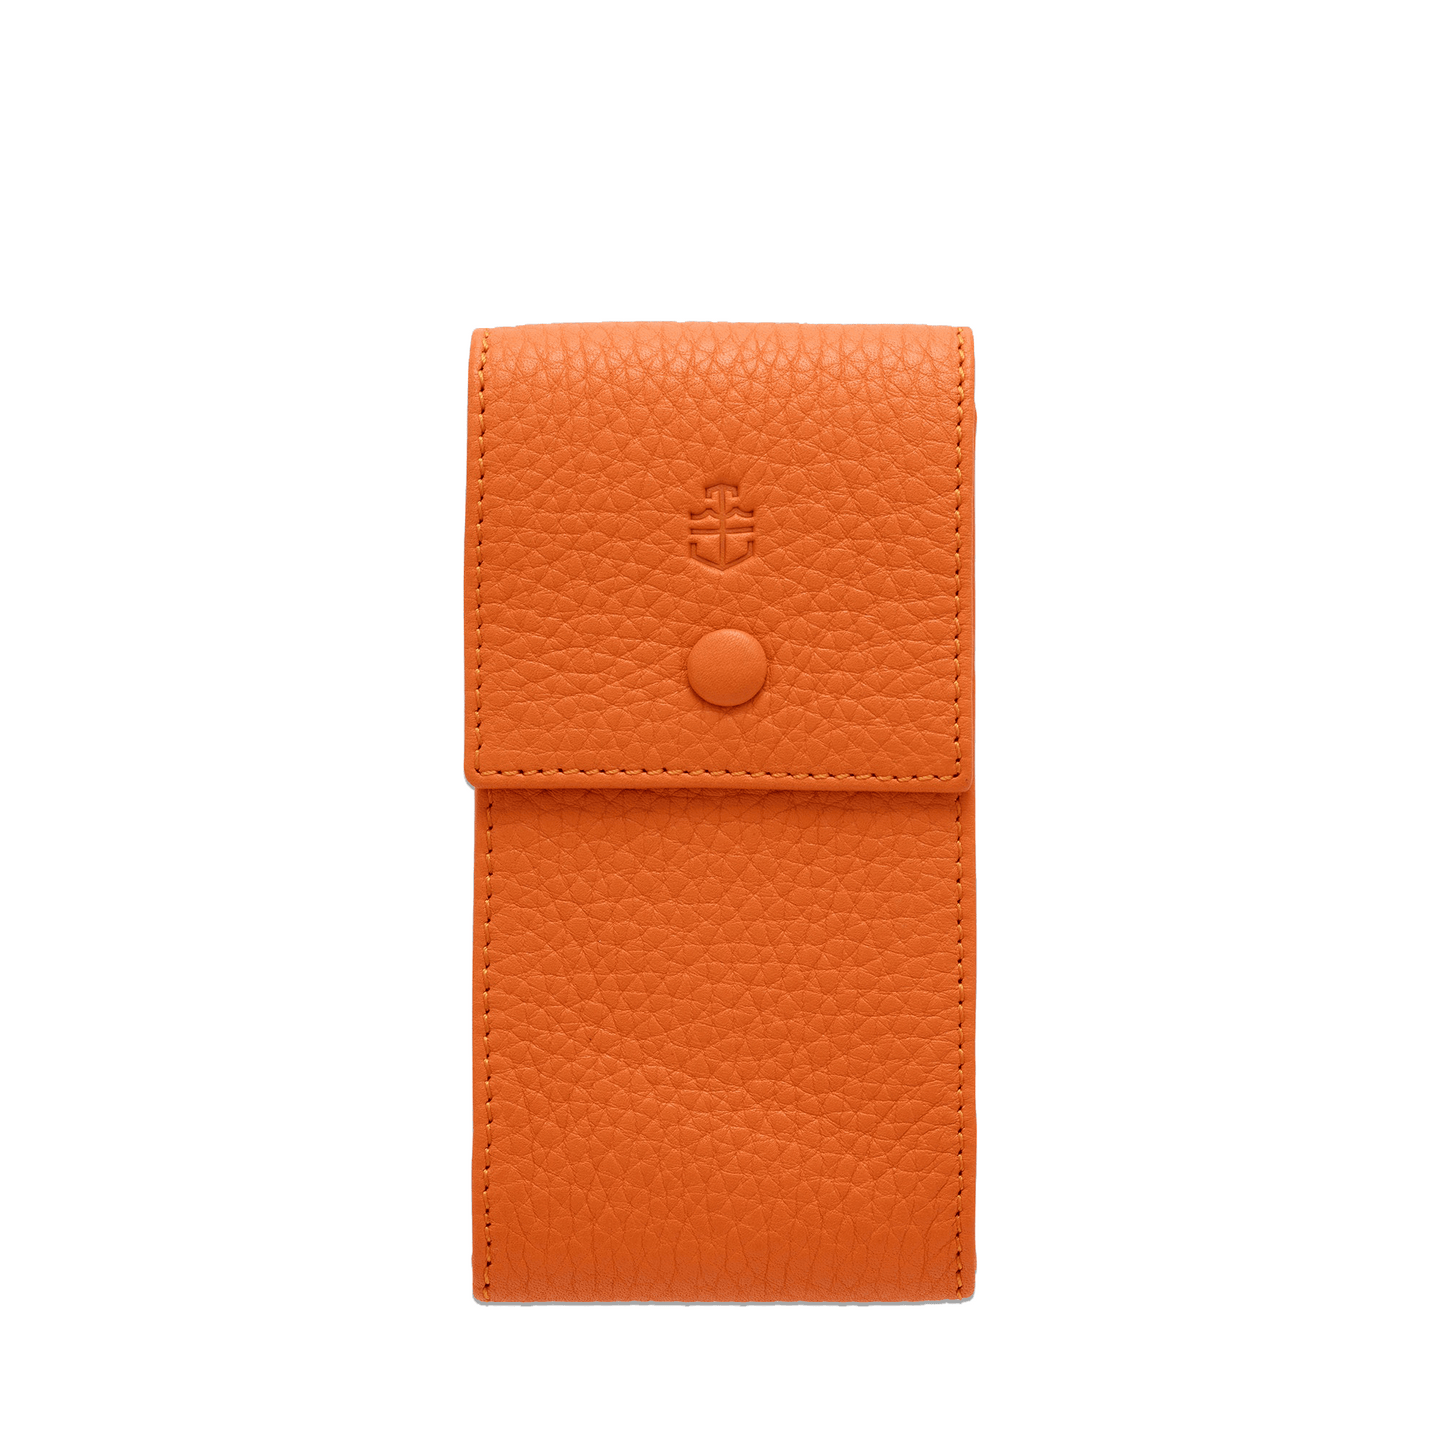 Time+Tide Watches - Orange Elegant Leather Watch Pouch